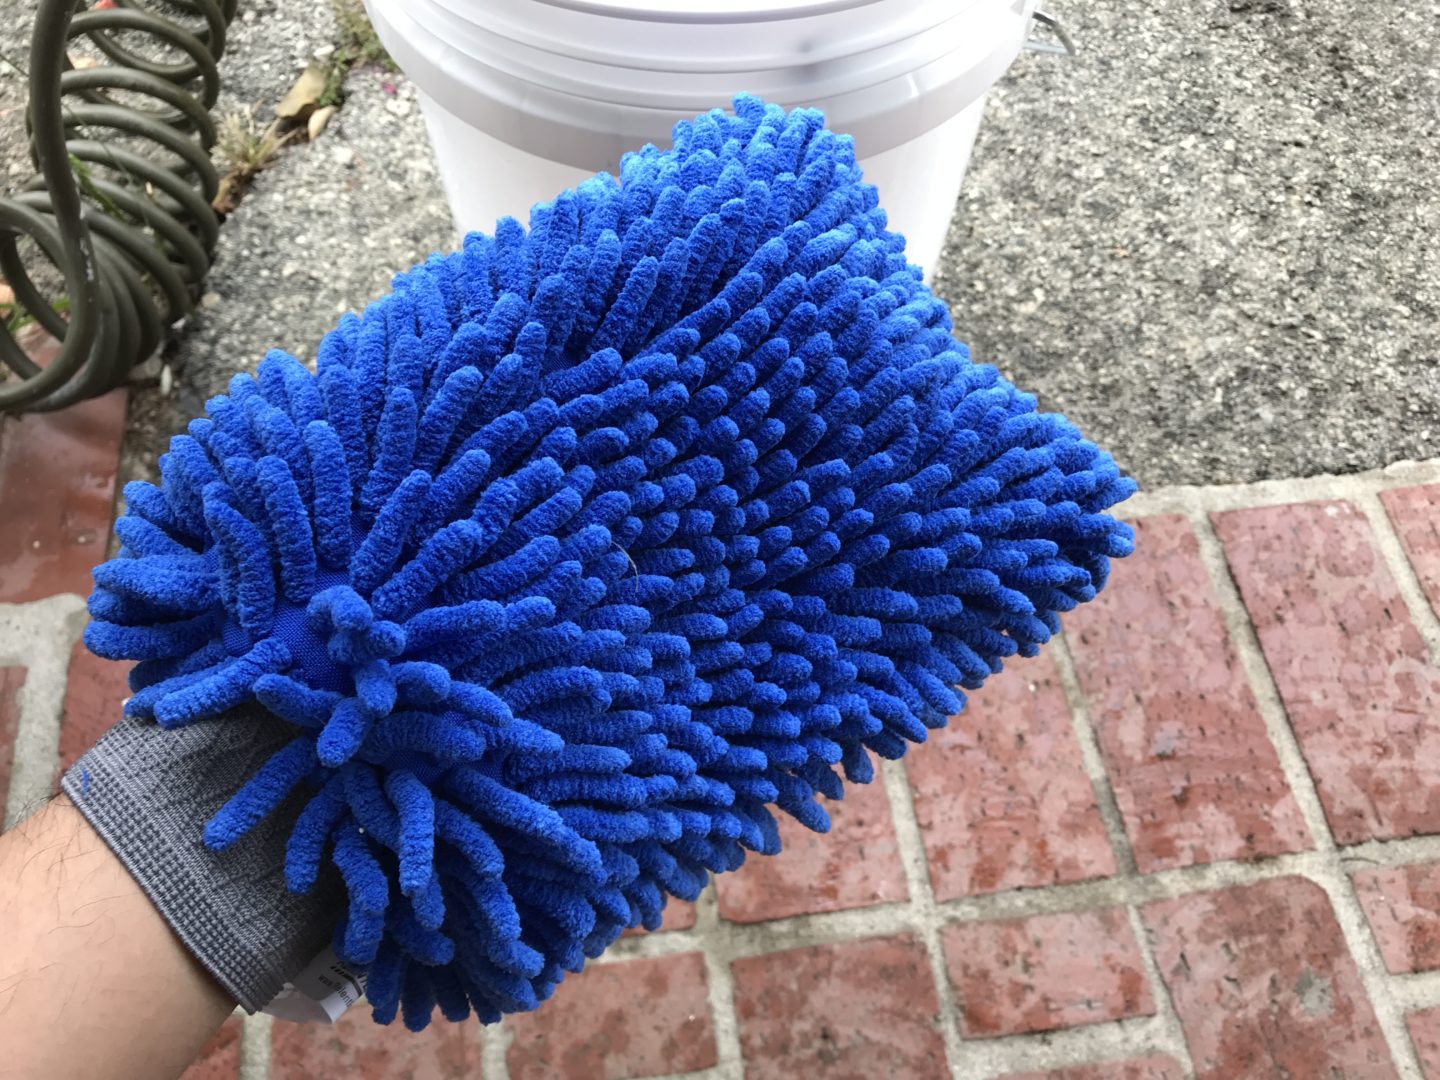 Relentless Drive Wash Mitt Review - The Track Ahead